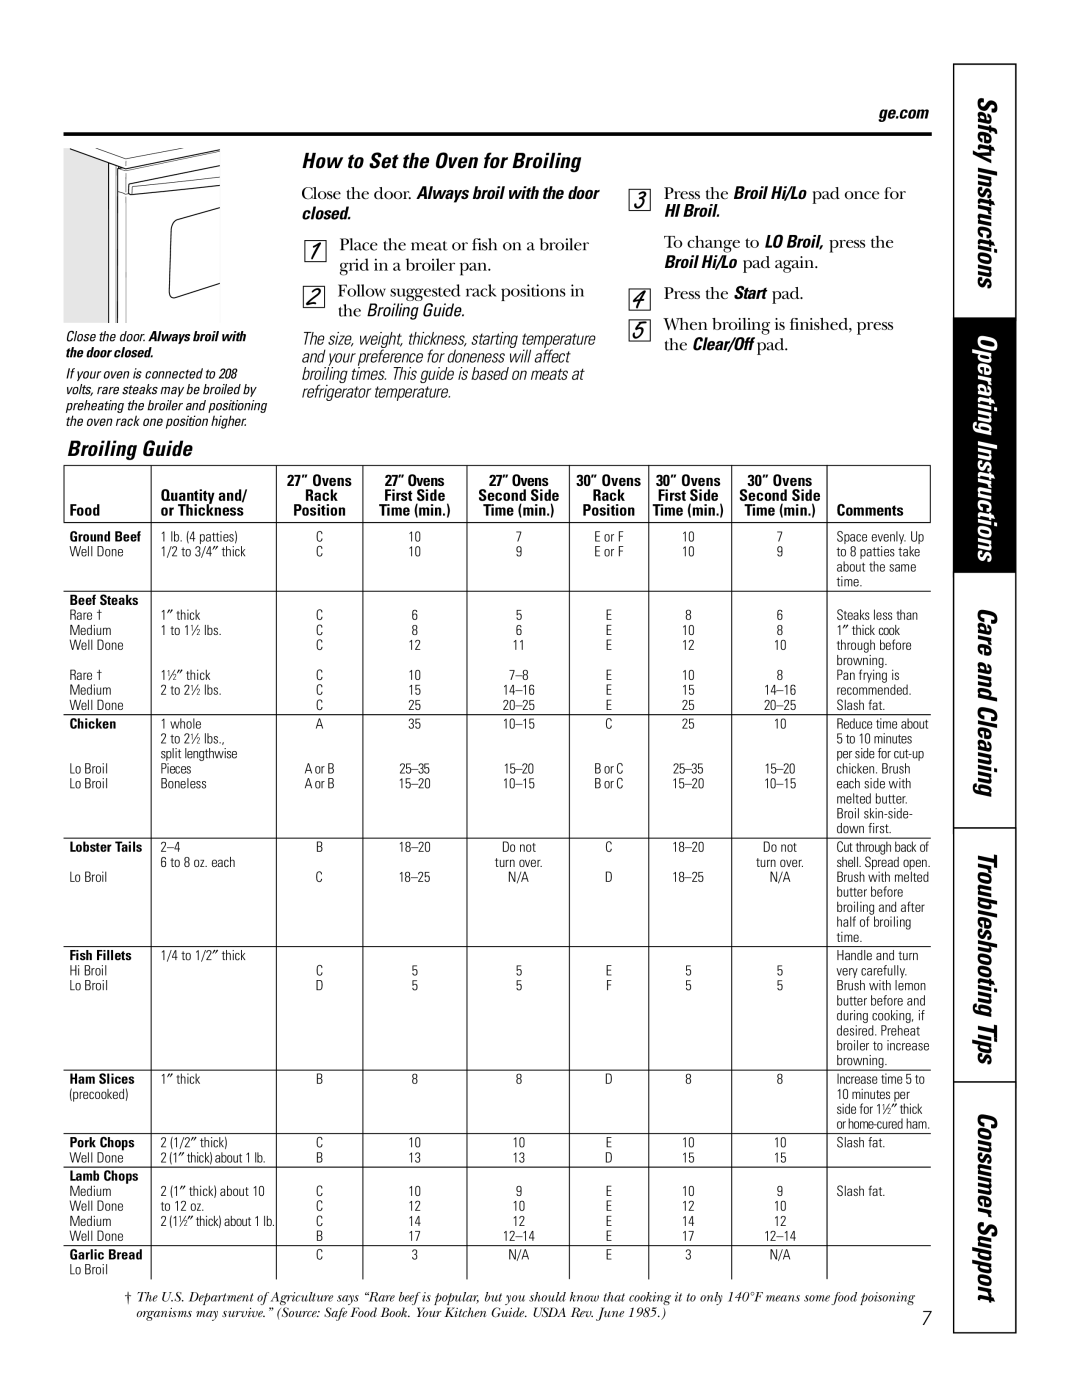 GE PK916 Instructions Operating, How to Set the Oven for Broiling, Safety, the Broiling Guide, Quantity and, 27” Ovens 